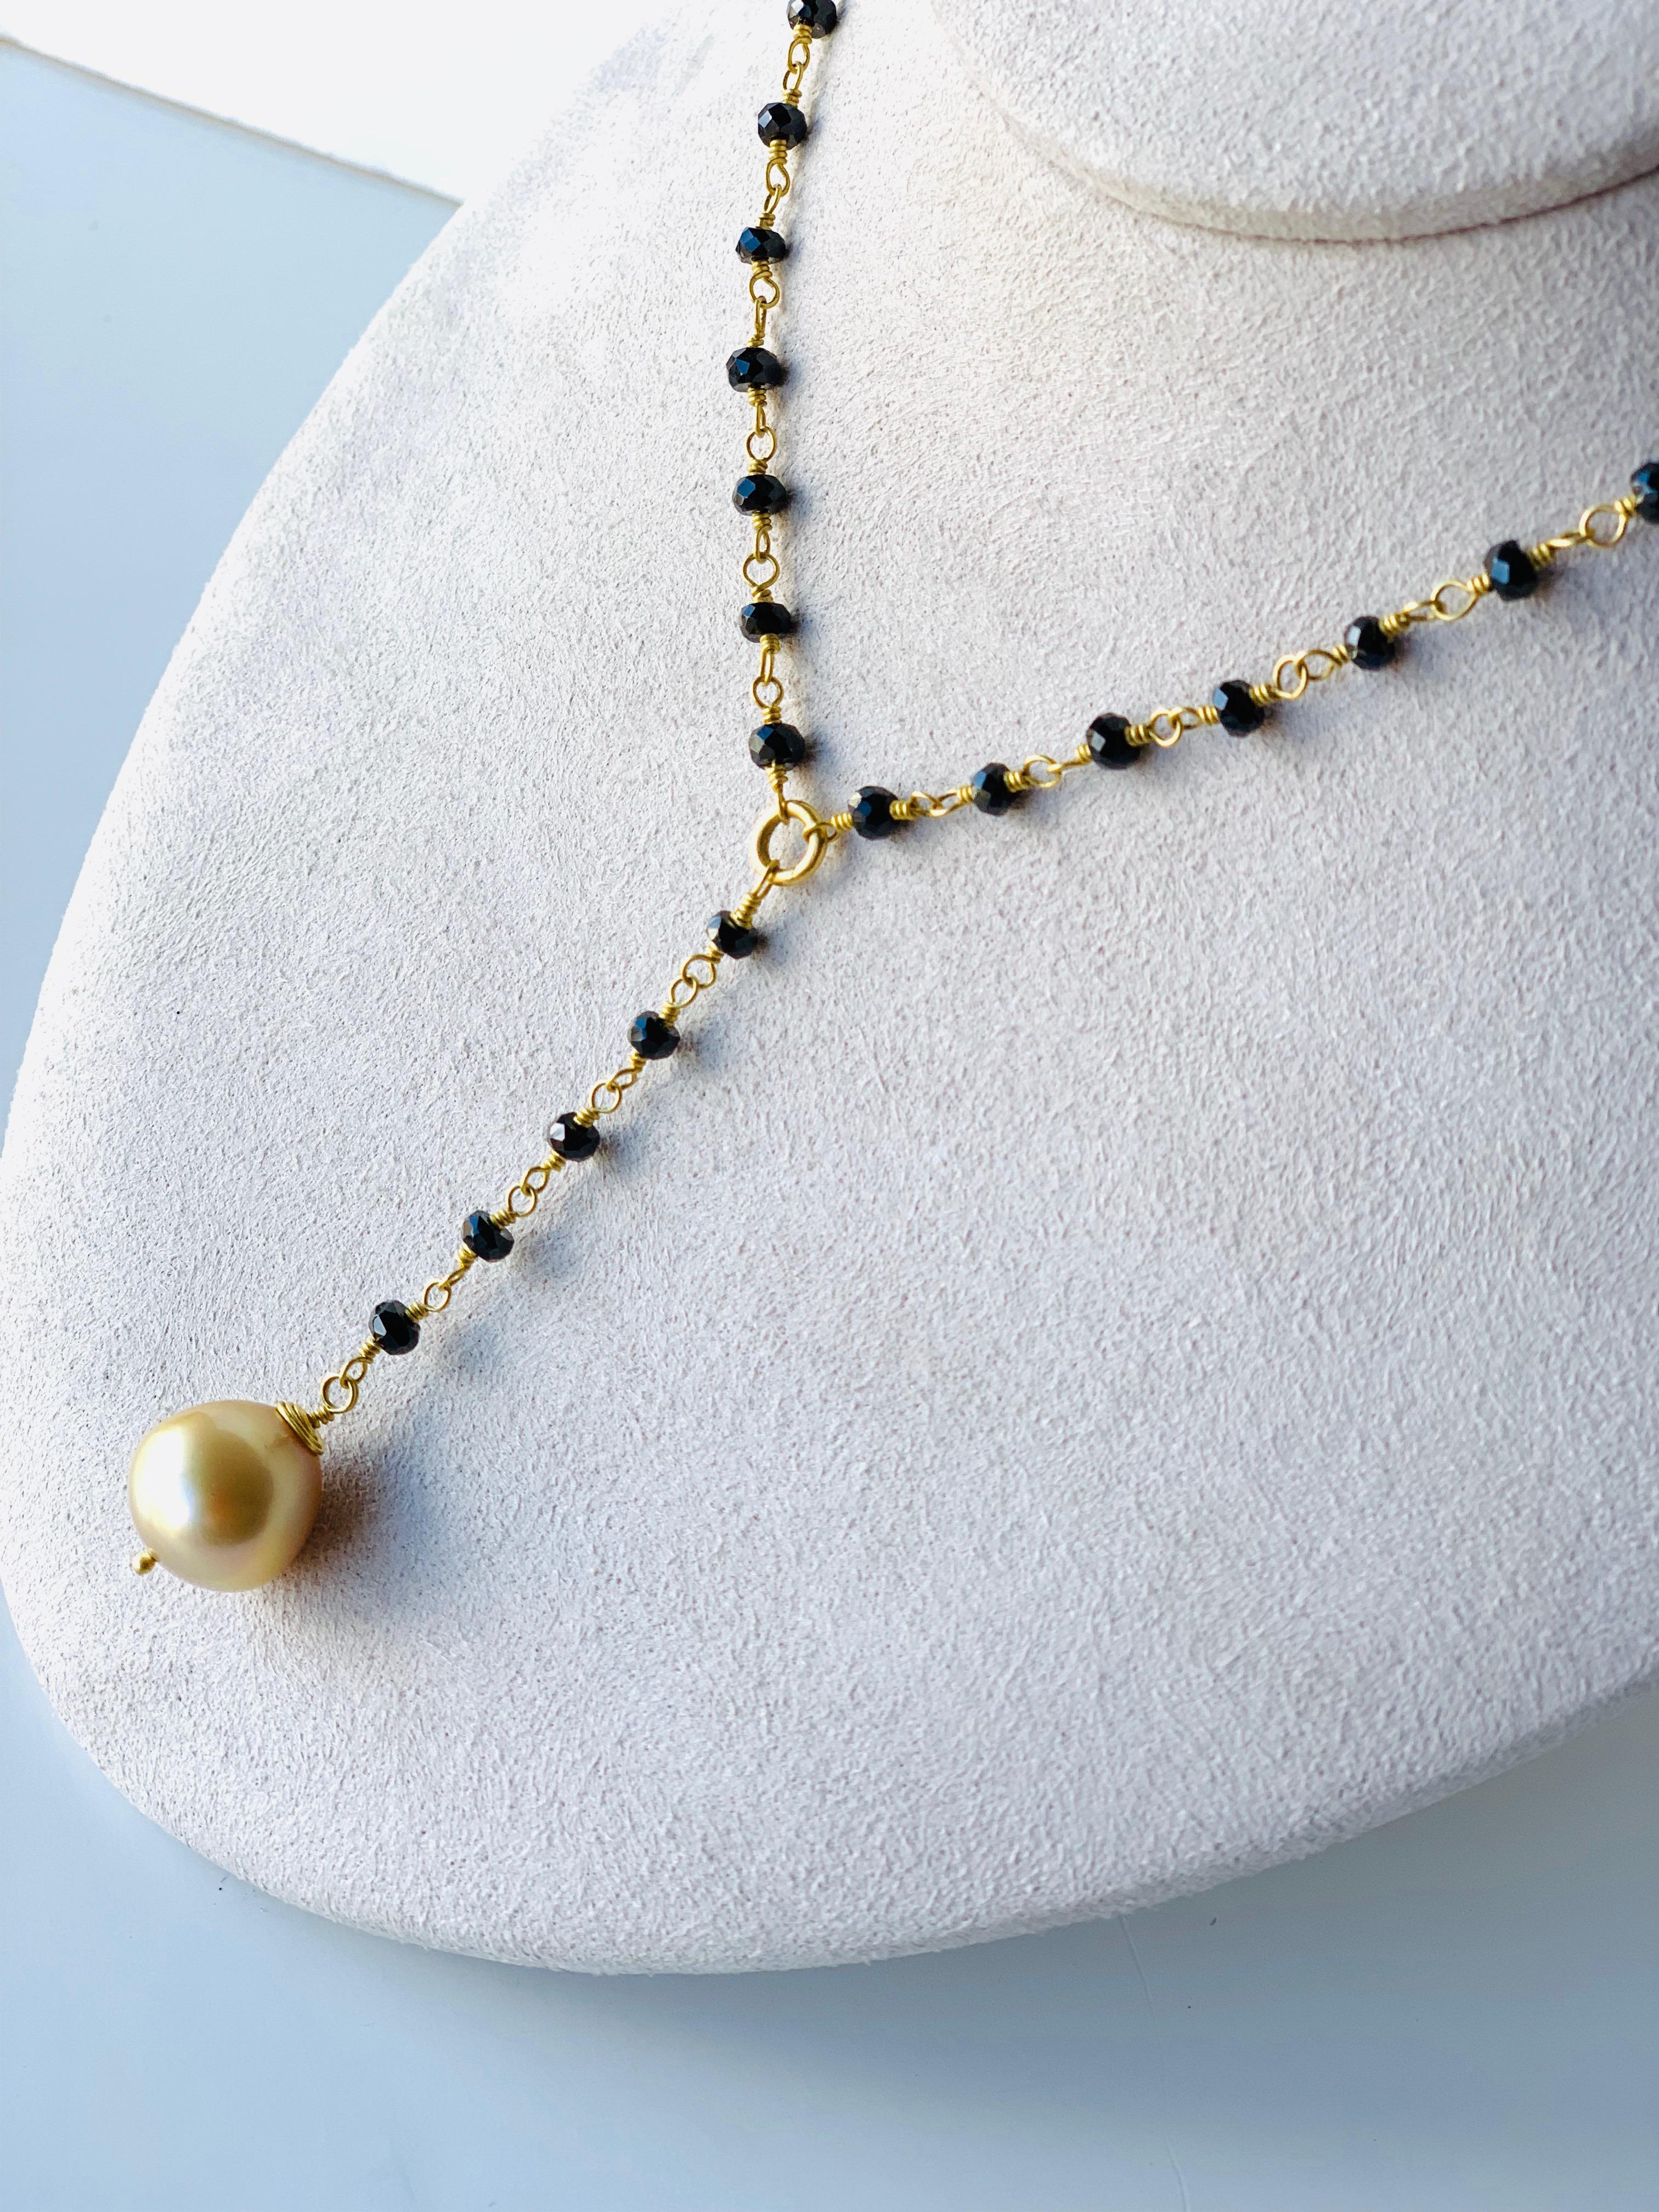 Round Cut South Sea Golden Pearl and Black Spinel Necklace 22 Karat Gold